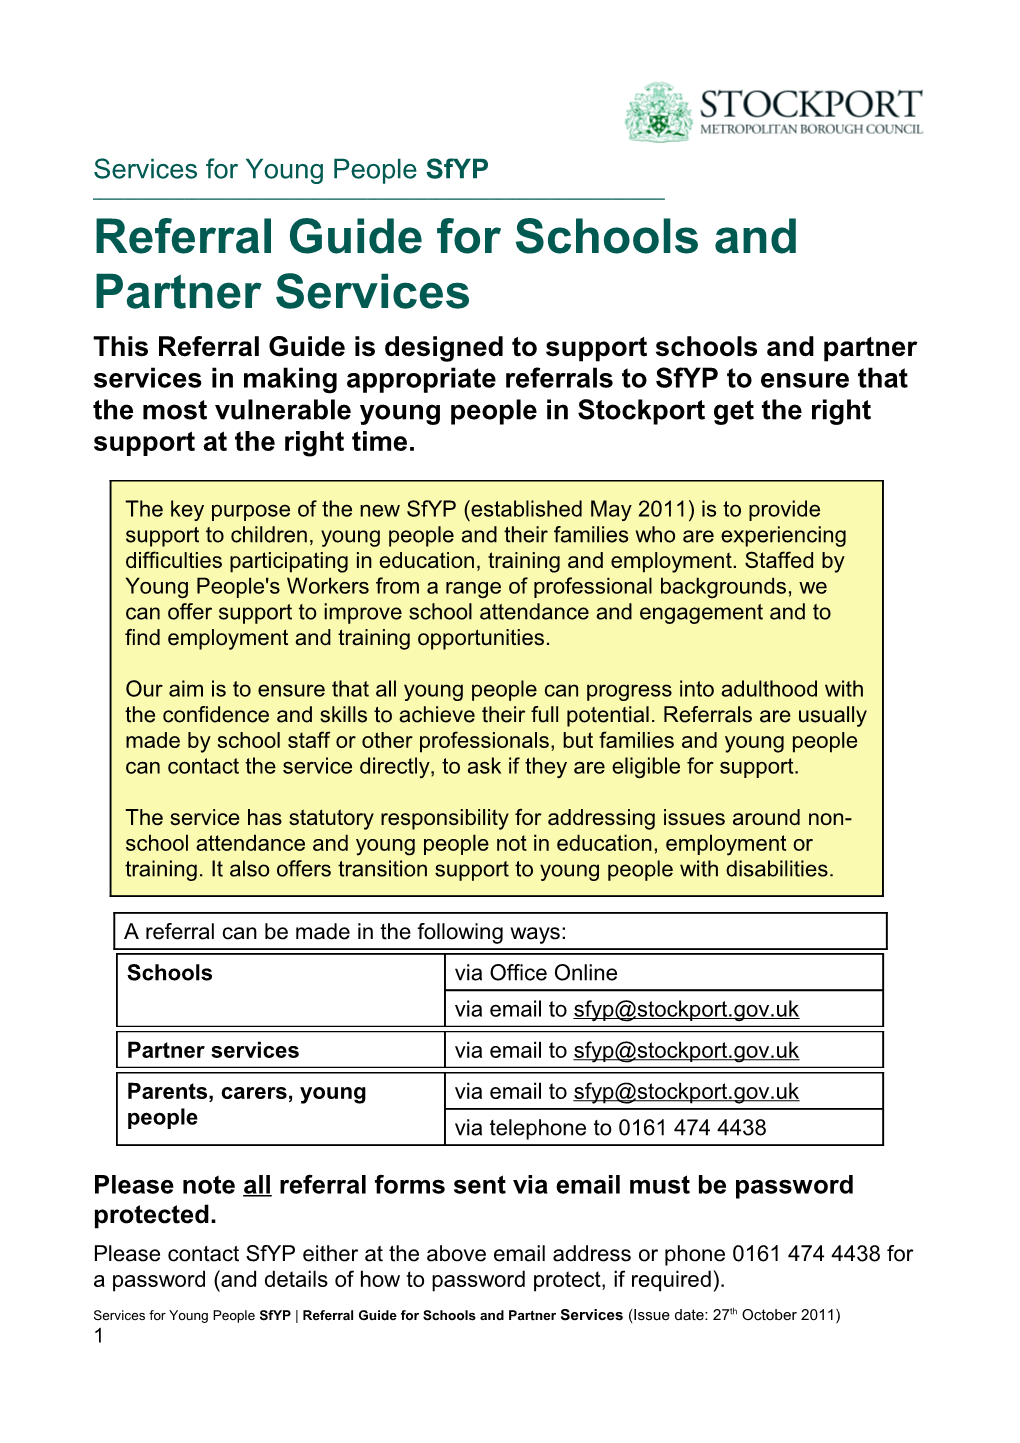 Sfyp Referral Services for Young People Guide for Schools and Partner Services October 2011